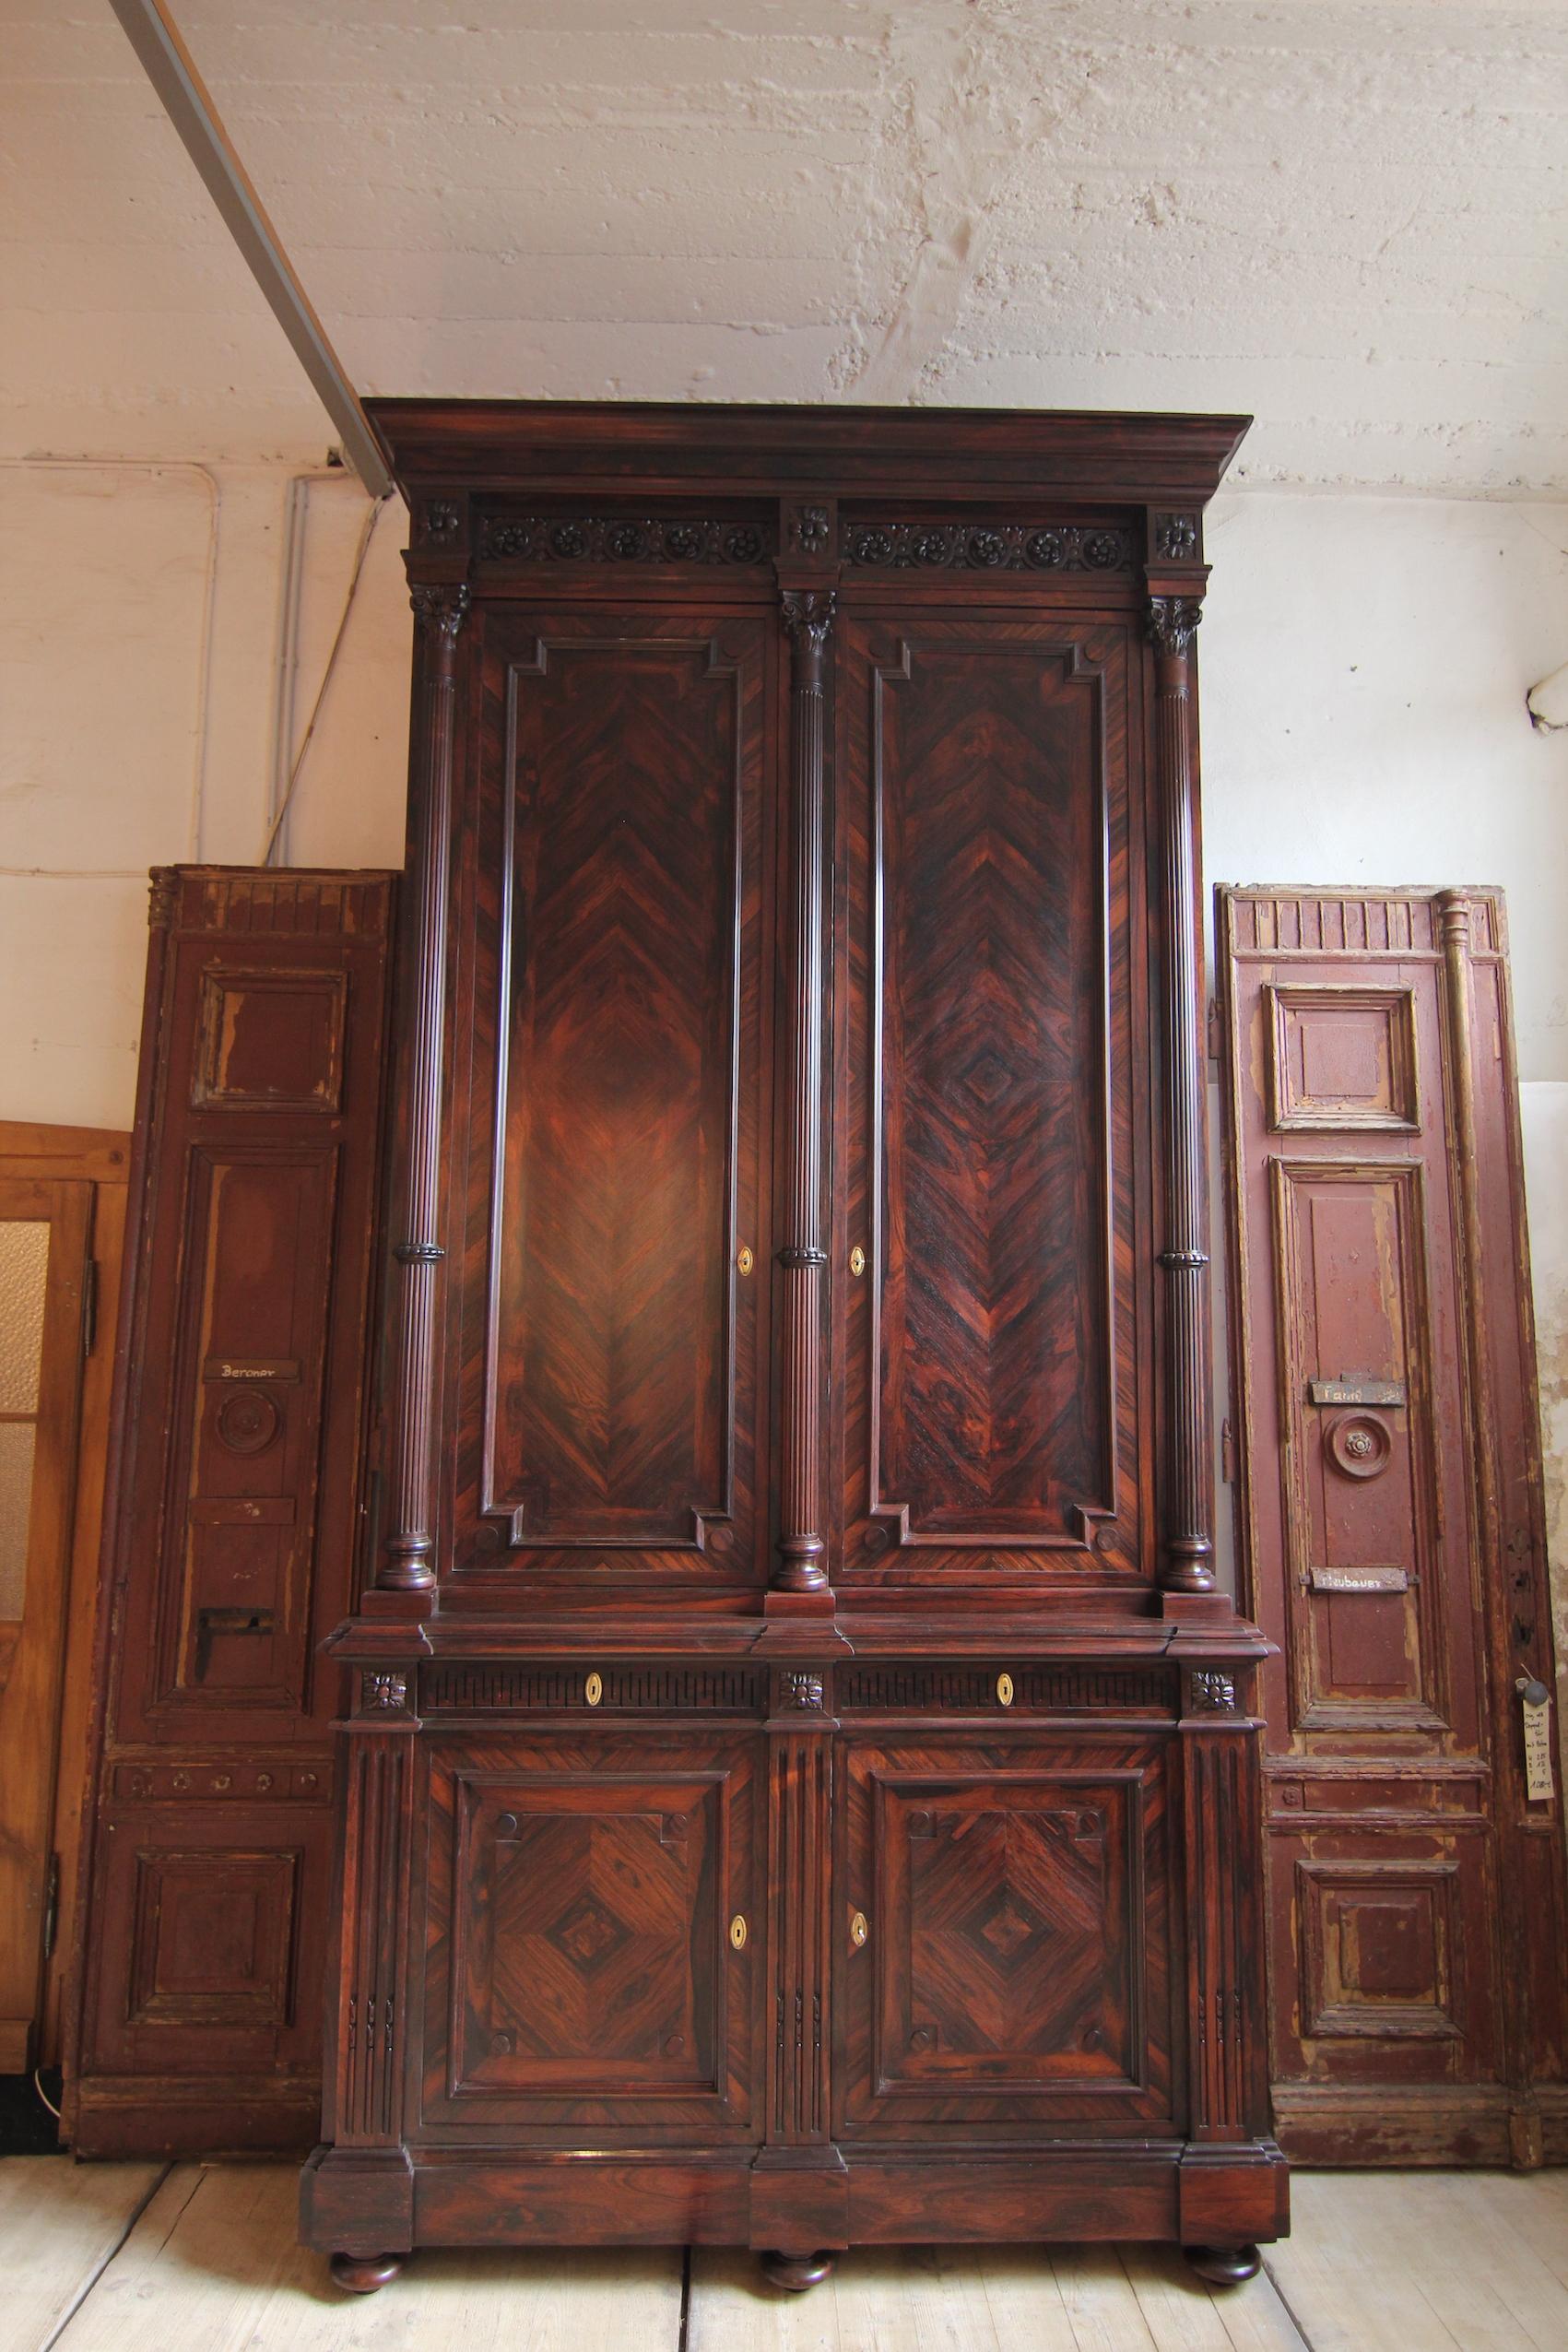 Probably the tallest cabinet on the market.
A breathtaking neoclassical palisander cabinet from the 19th century. Presumably of French origin.
Solid rosewood and veneered on oak.

The cabinet is architecturally structured vertically by three